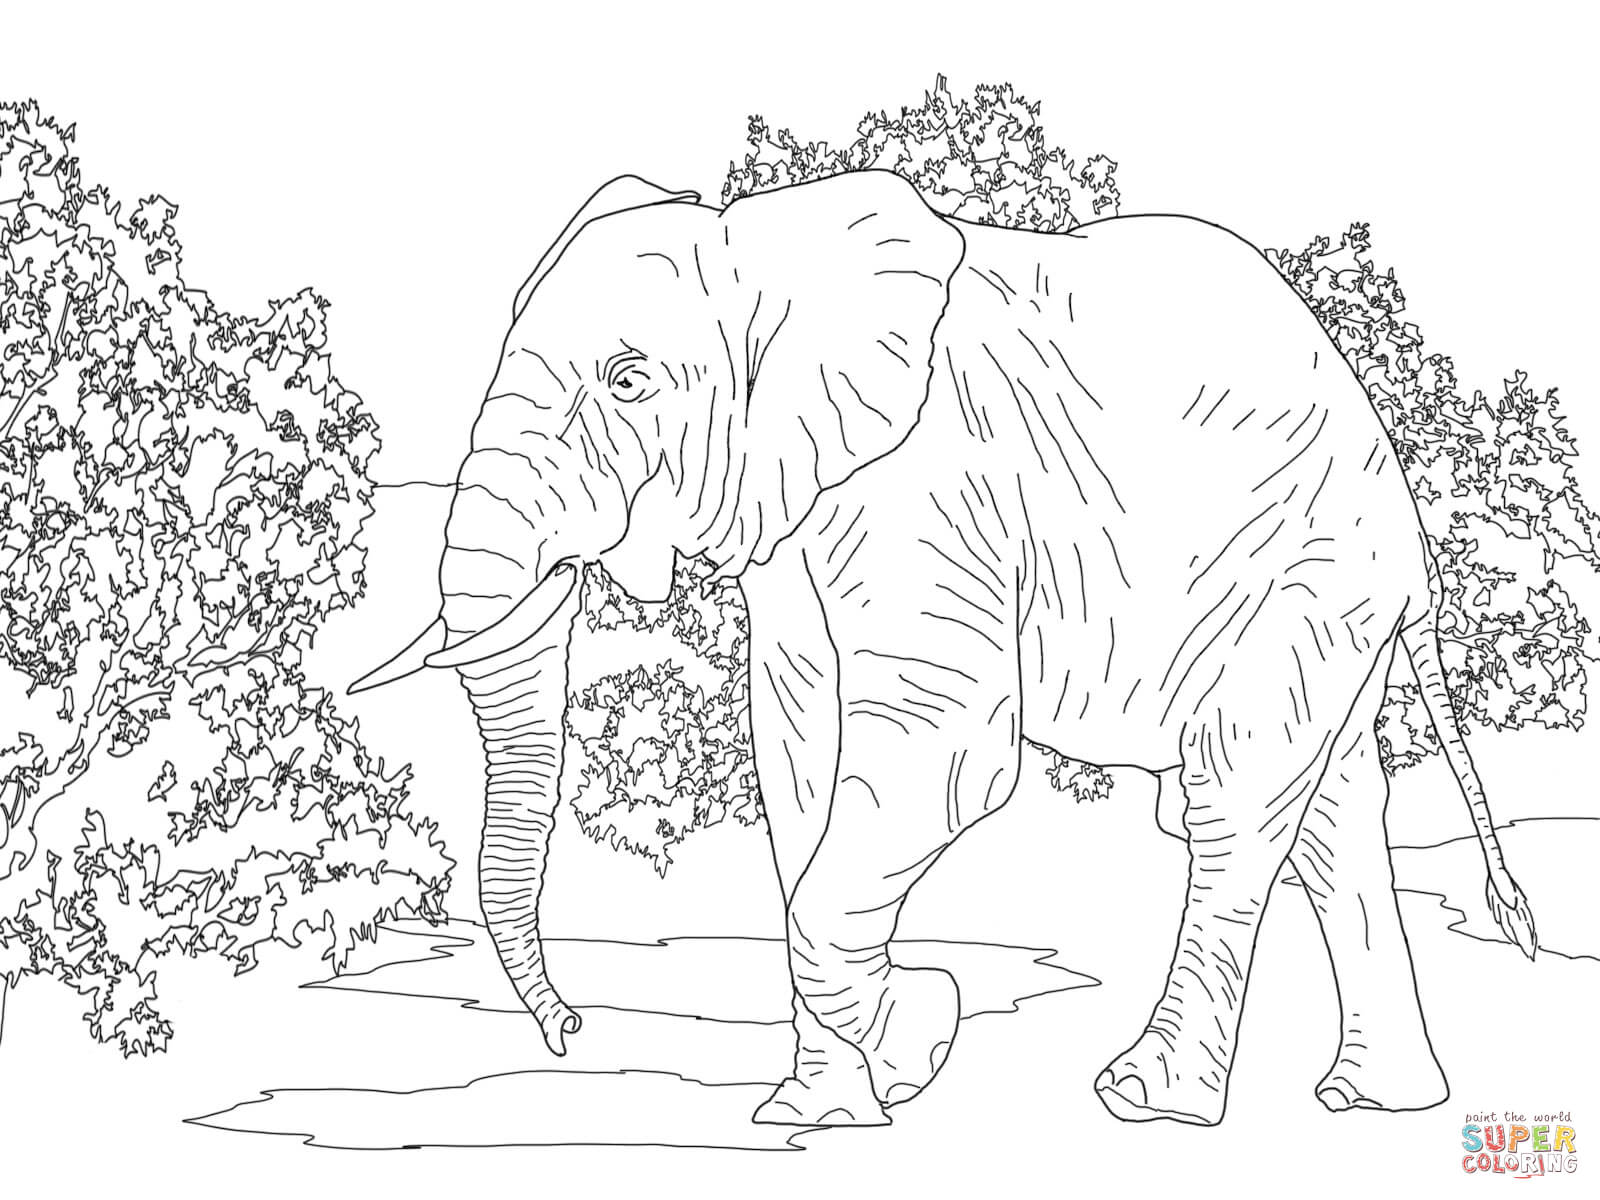 Free Elephant Coloring Pages for Adults - Easy Peasy and Fun